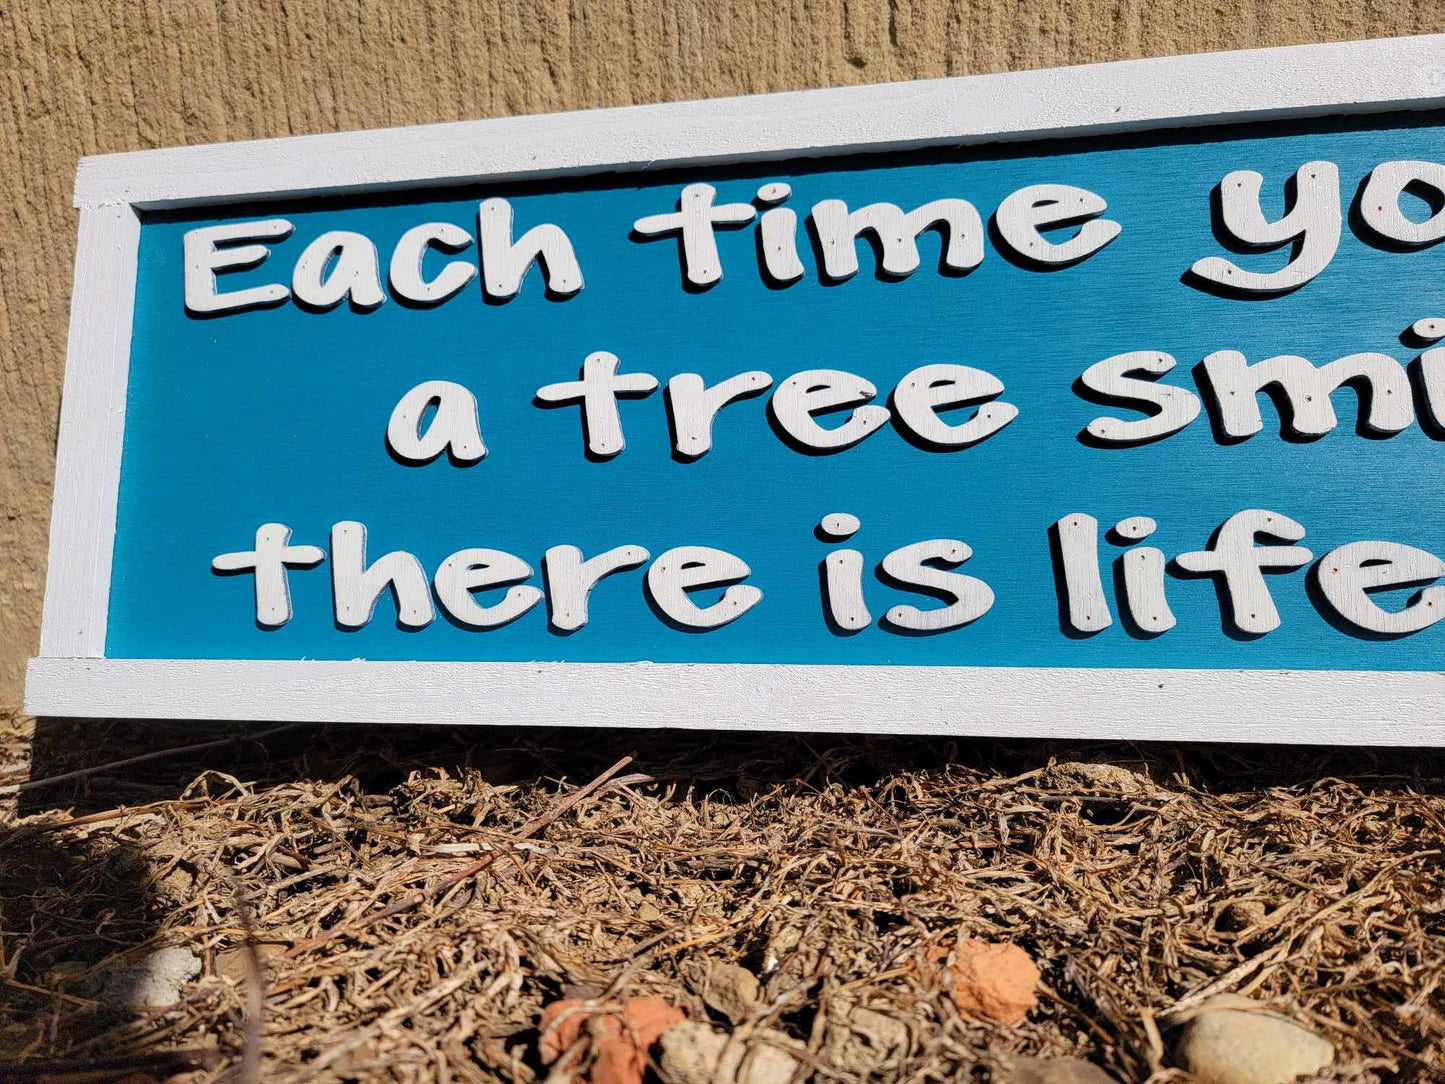 Books Reader Tree Wooden Handmade Home Decor Sign Raised Text Life After Death Time Blue and White Book Lover Quote Wall Art